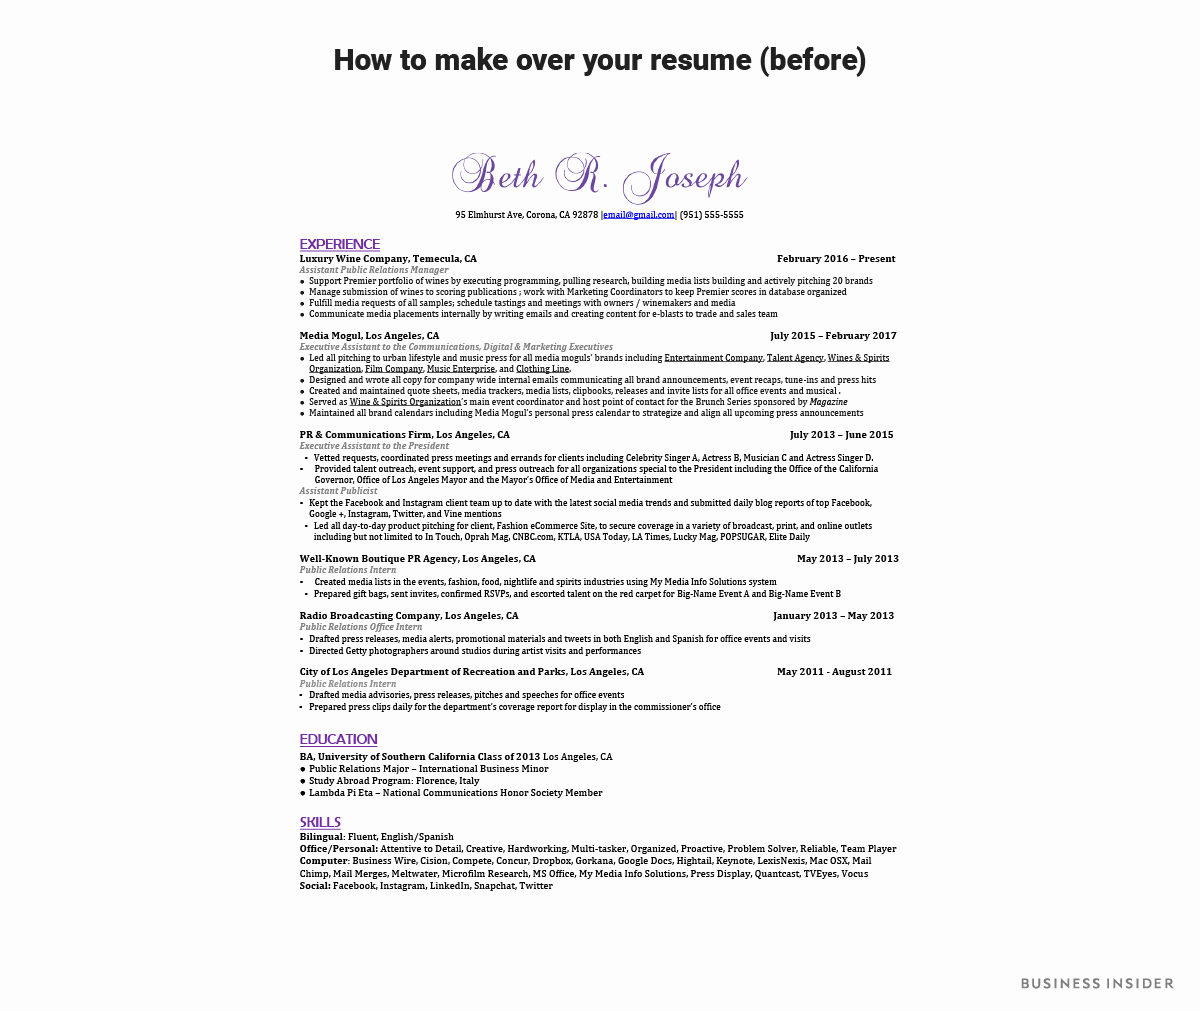 How to Update Your Resume when You A New Job